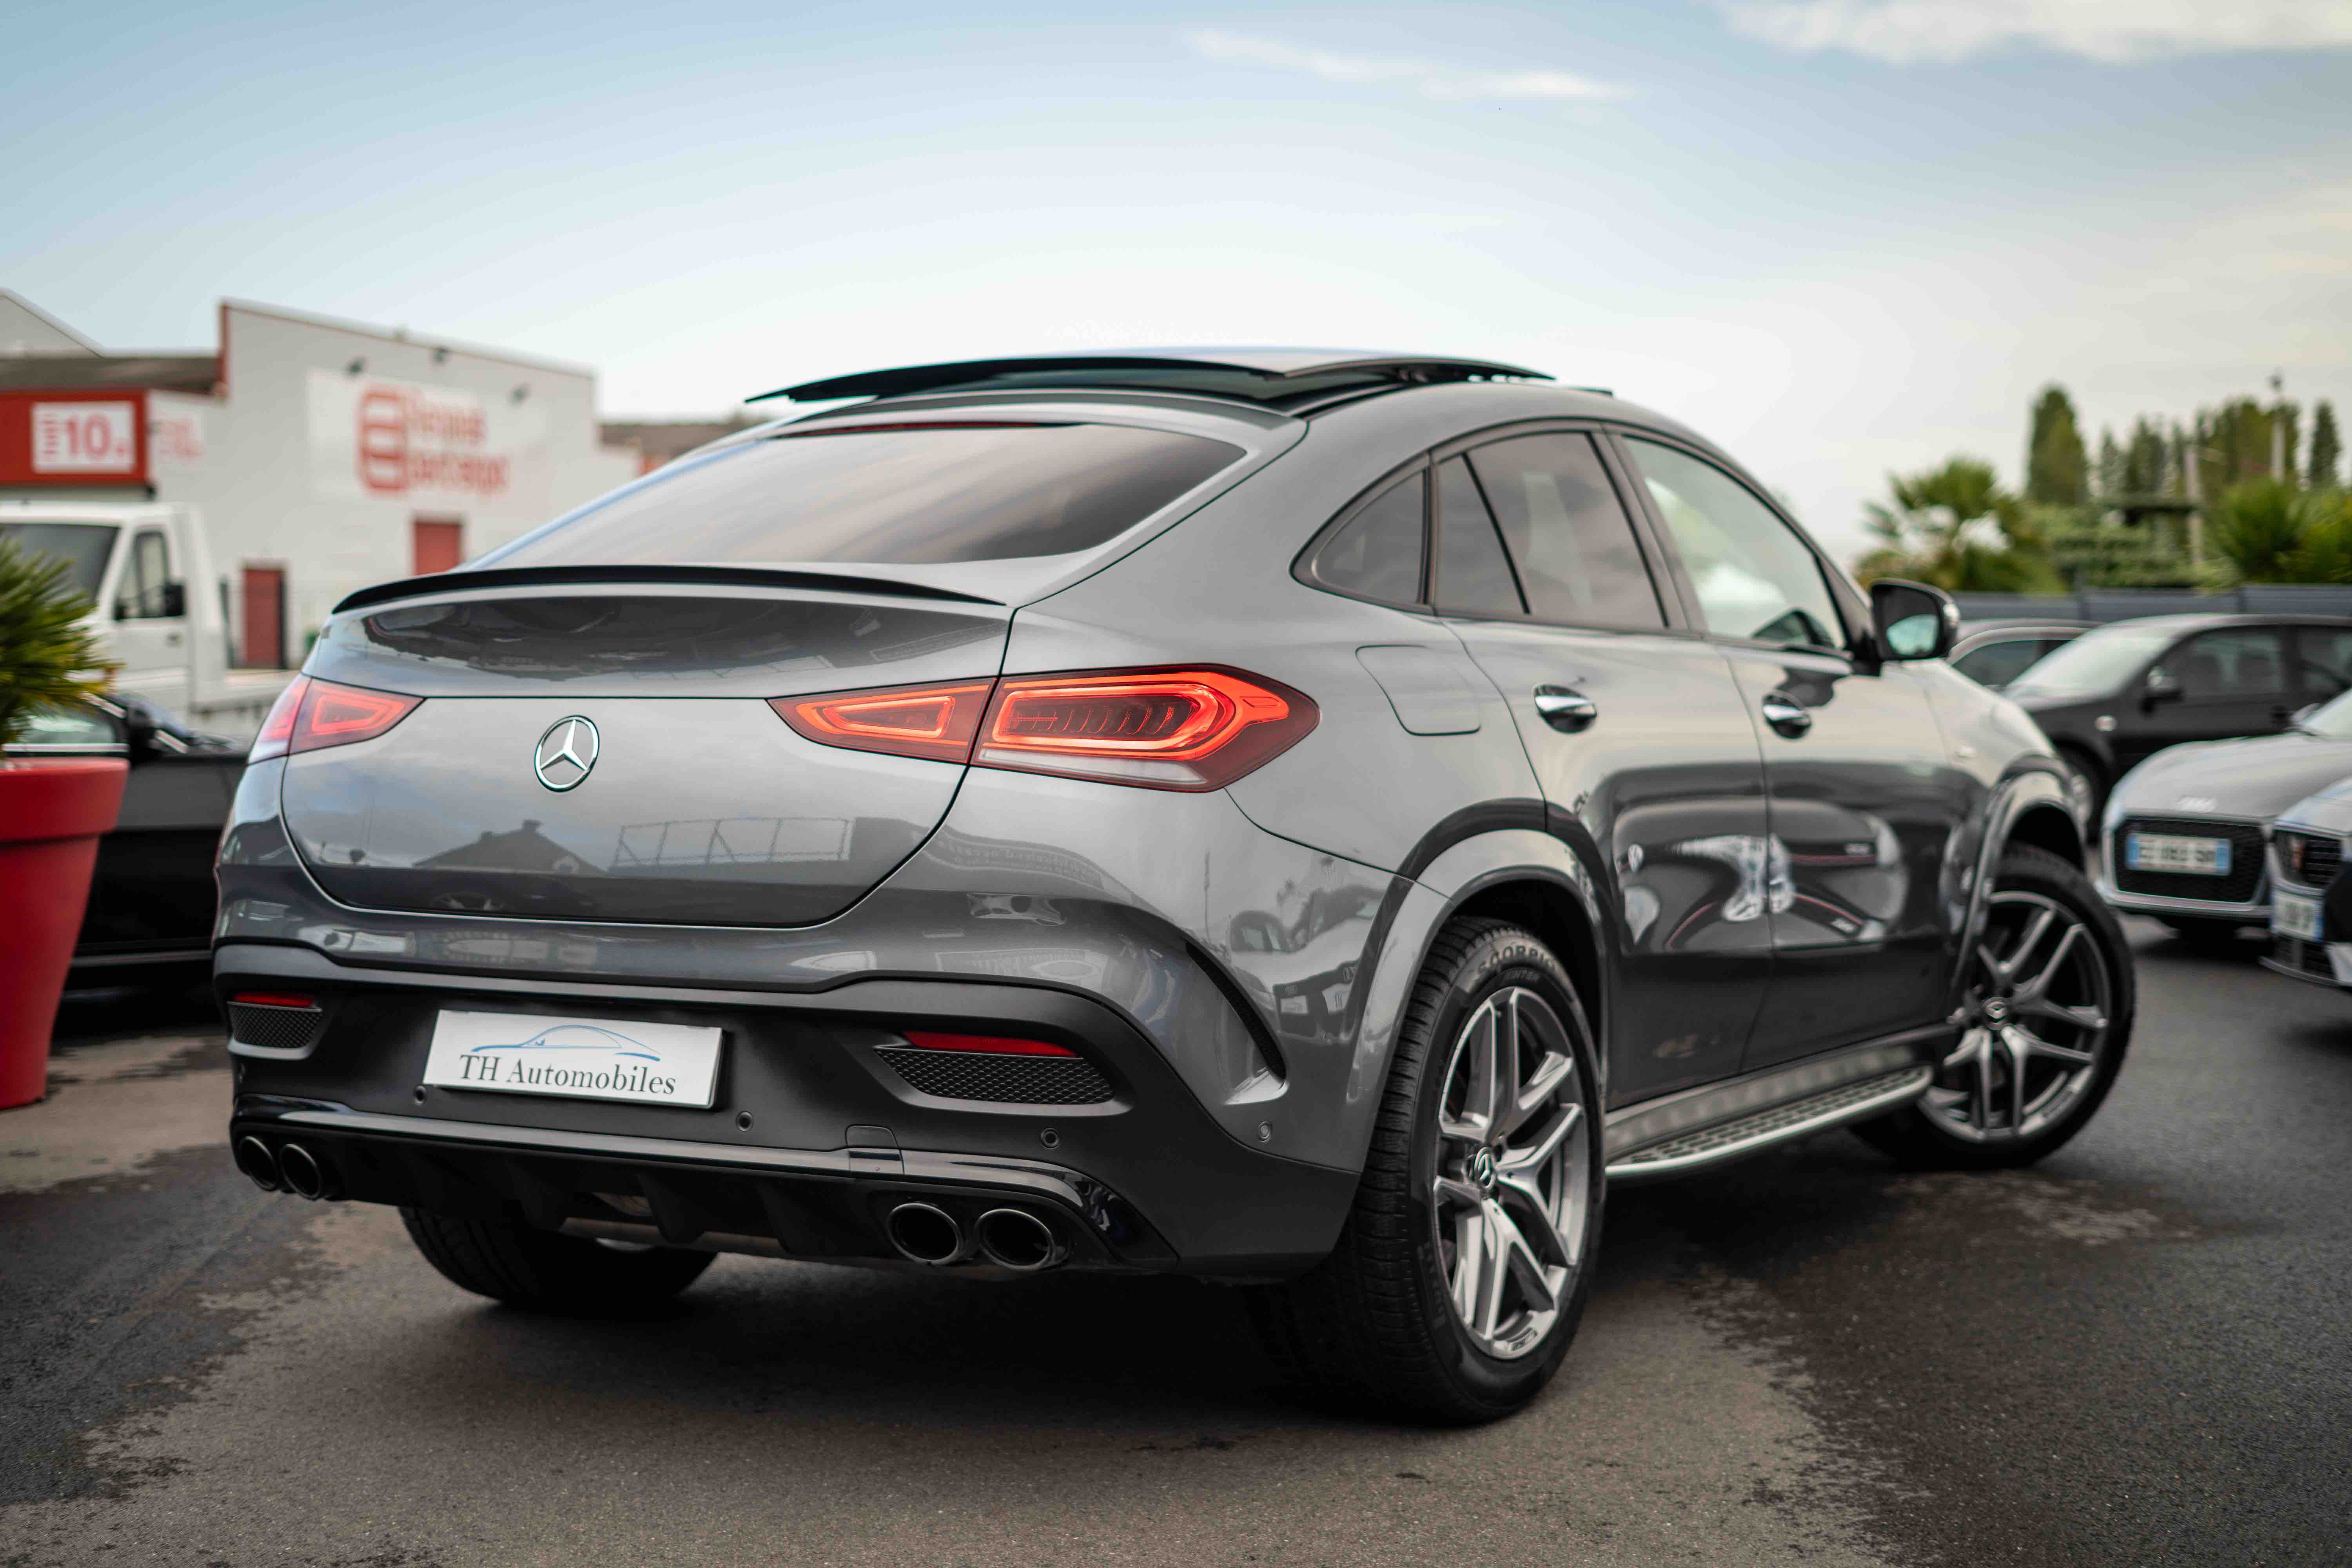 MERCEDES GLE COUPE 53 AMG 435ch + 22ch EQ Boost 4MATIC+ 9G-SPEEDSHIFT TCT